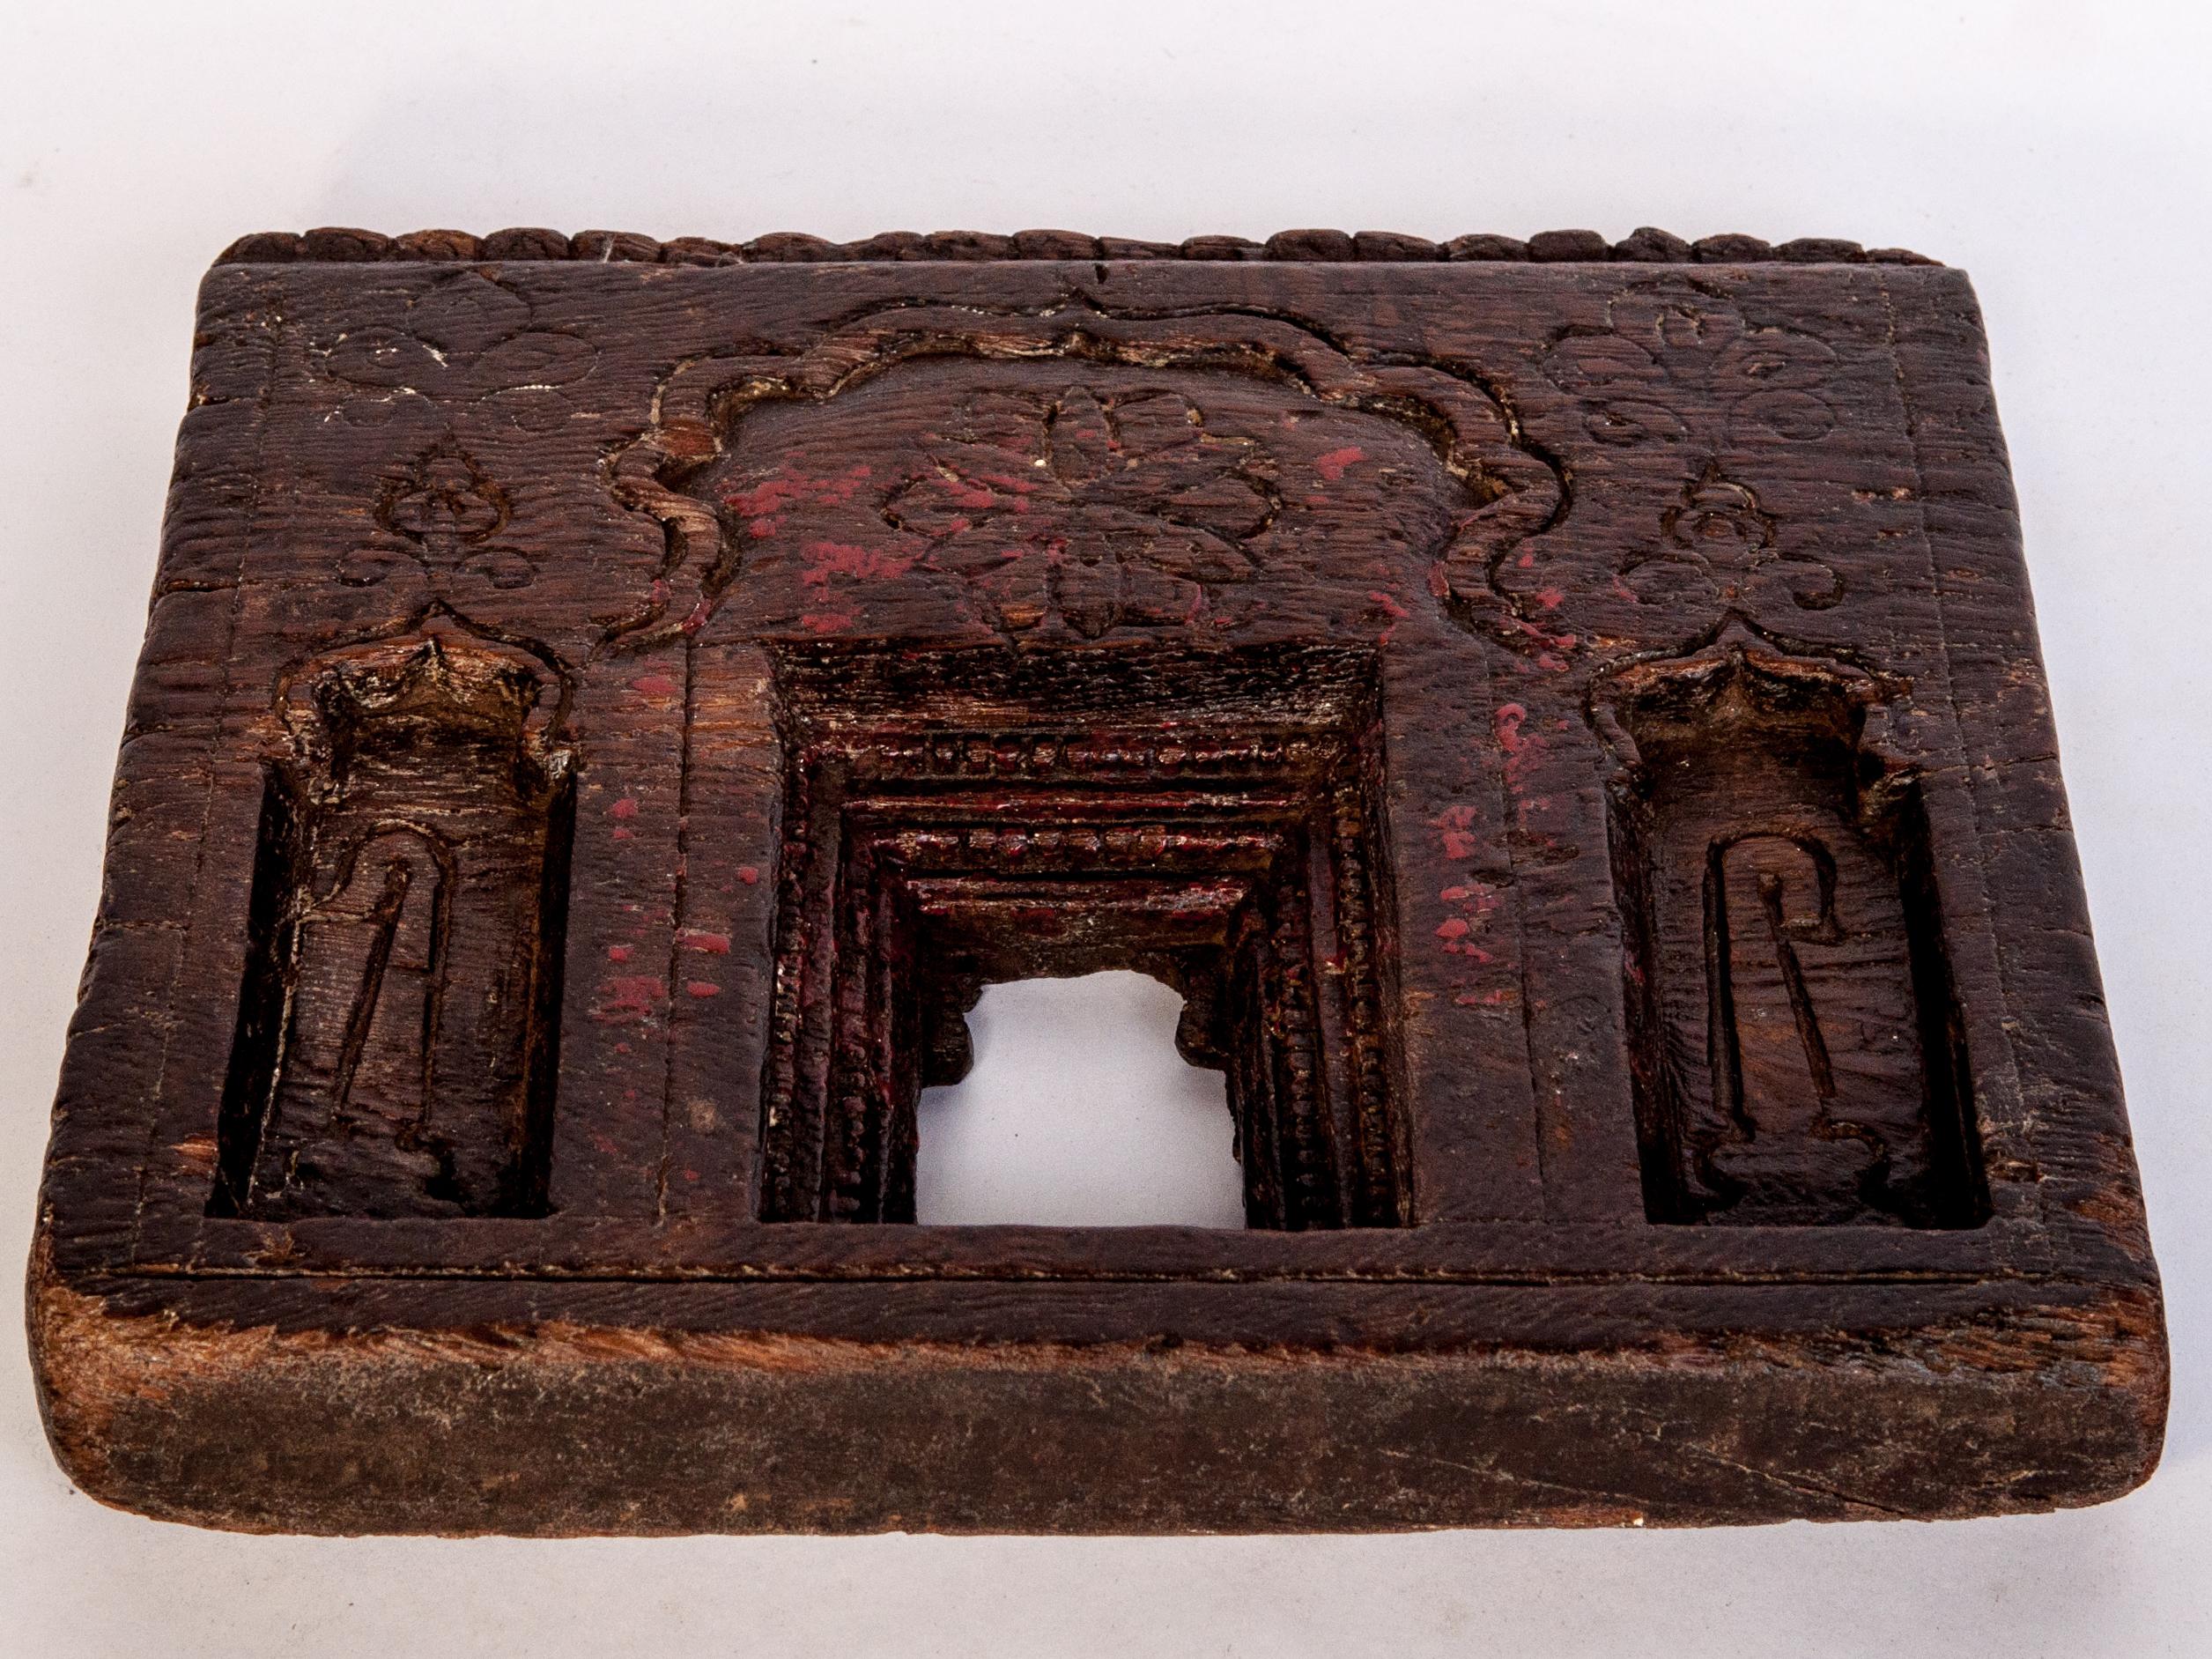 Vintage miniature architectural votive or picture frame, with traces of original paint, mid-20th century, India.
Please note that the display stand in several of the photos is not included in the price, but is available as an option.
This vintage